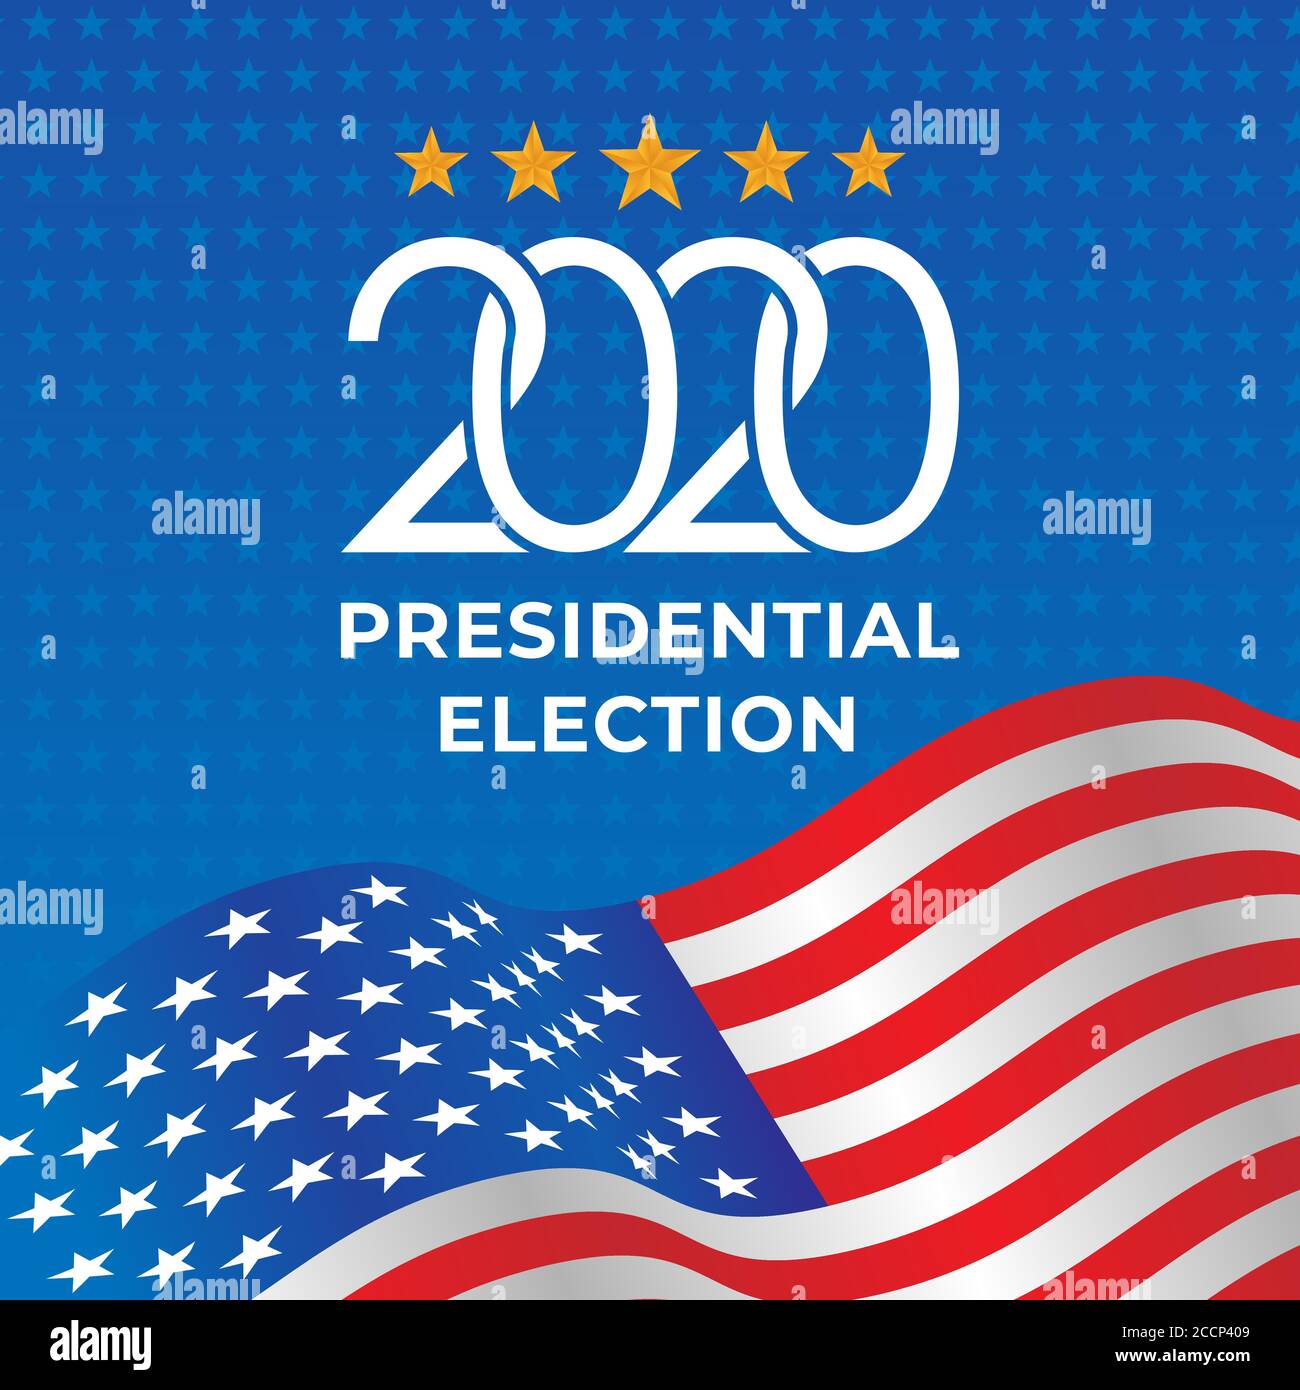 United States of America Presidential Election 2020 Vector illustration. USA Presidential Election 2020 Vector banner background design. 2020 US Presi Stock Vector